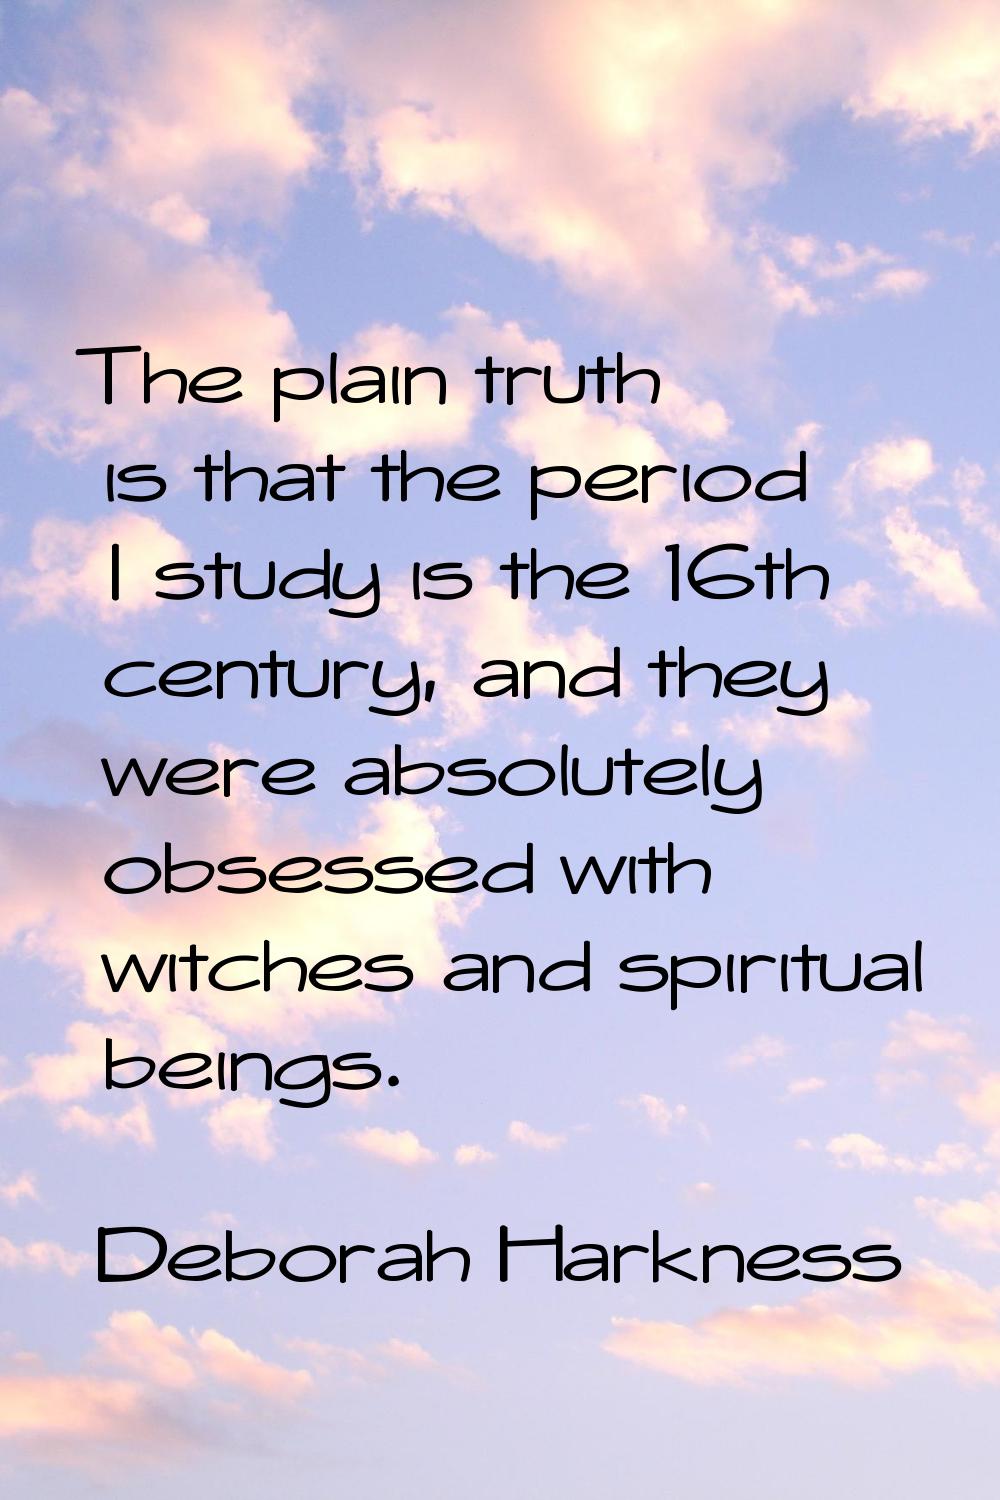 The plain truth is that the period I study is the 16th century, and they were absolutely obsessed w